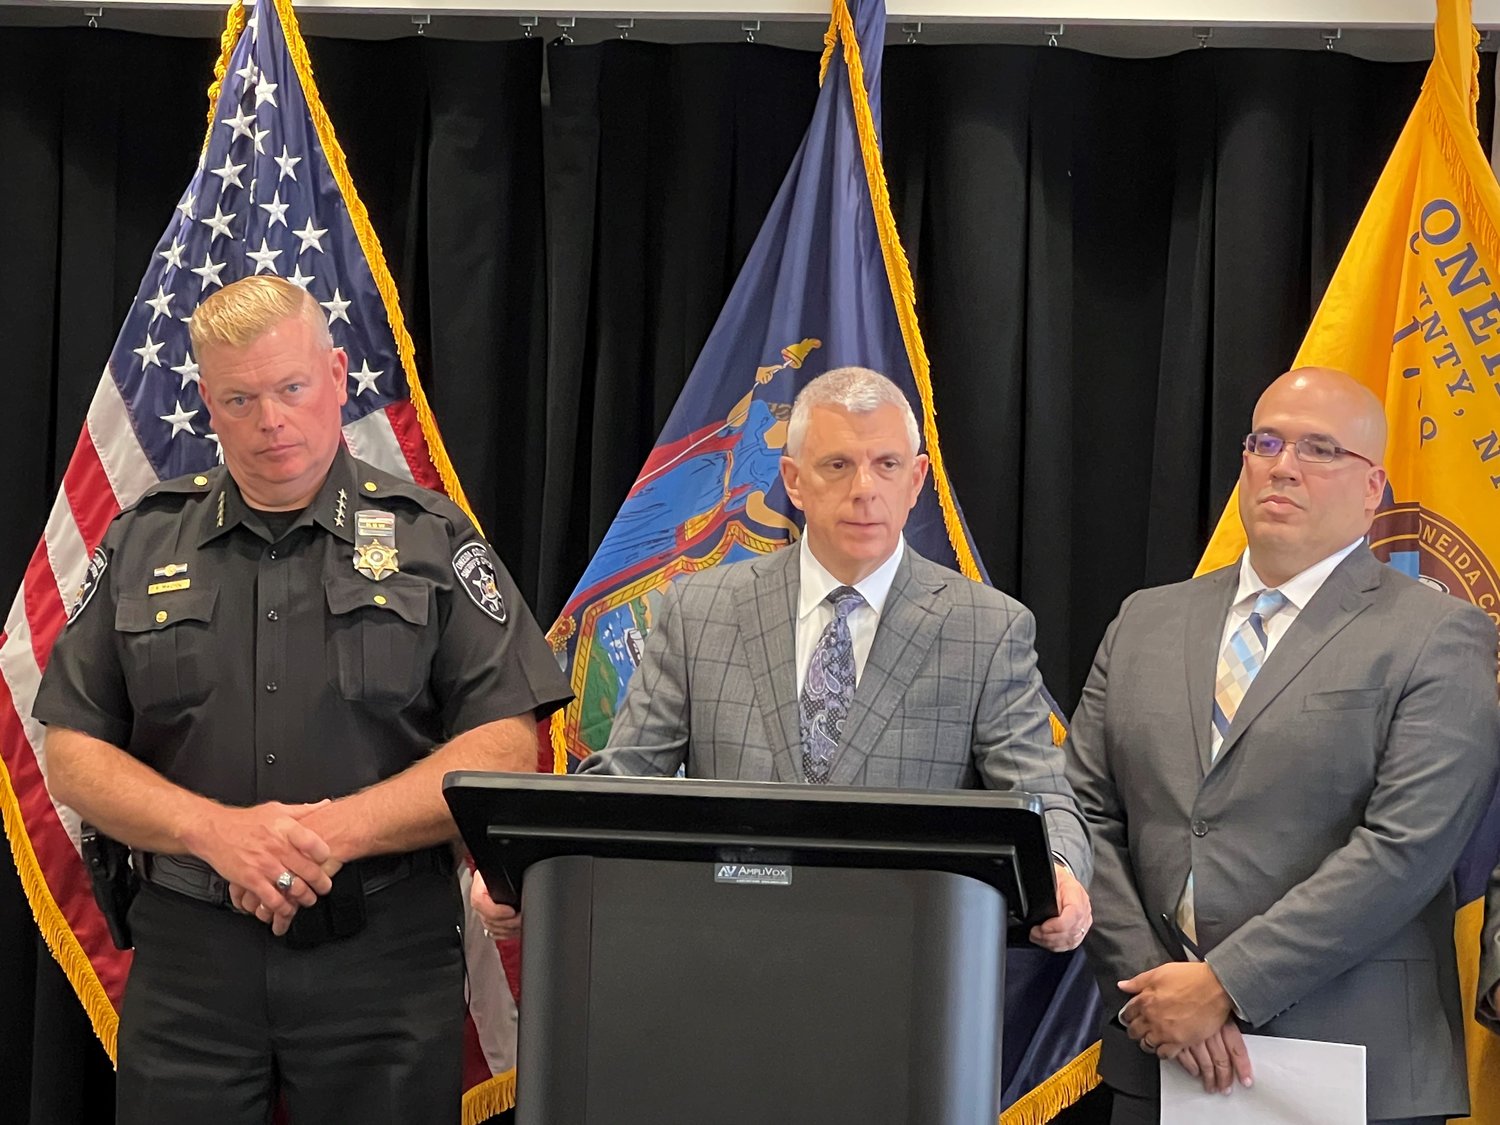 Officials discuss a new 4-year collective bargaining agreement with the union that represents corrections officers and court employees and Oneida County on Wednesday. From left: Sheriff Robert M. Maciol; Oneida County Executive Anthony J. Picente Jr.; and Local 1249 President Luis Roman.